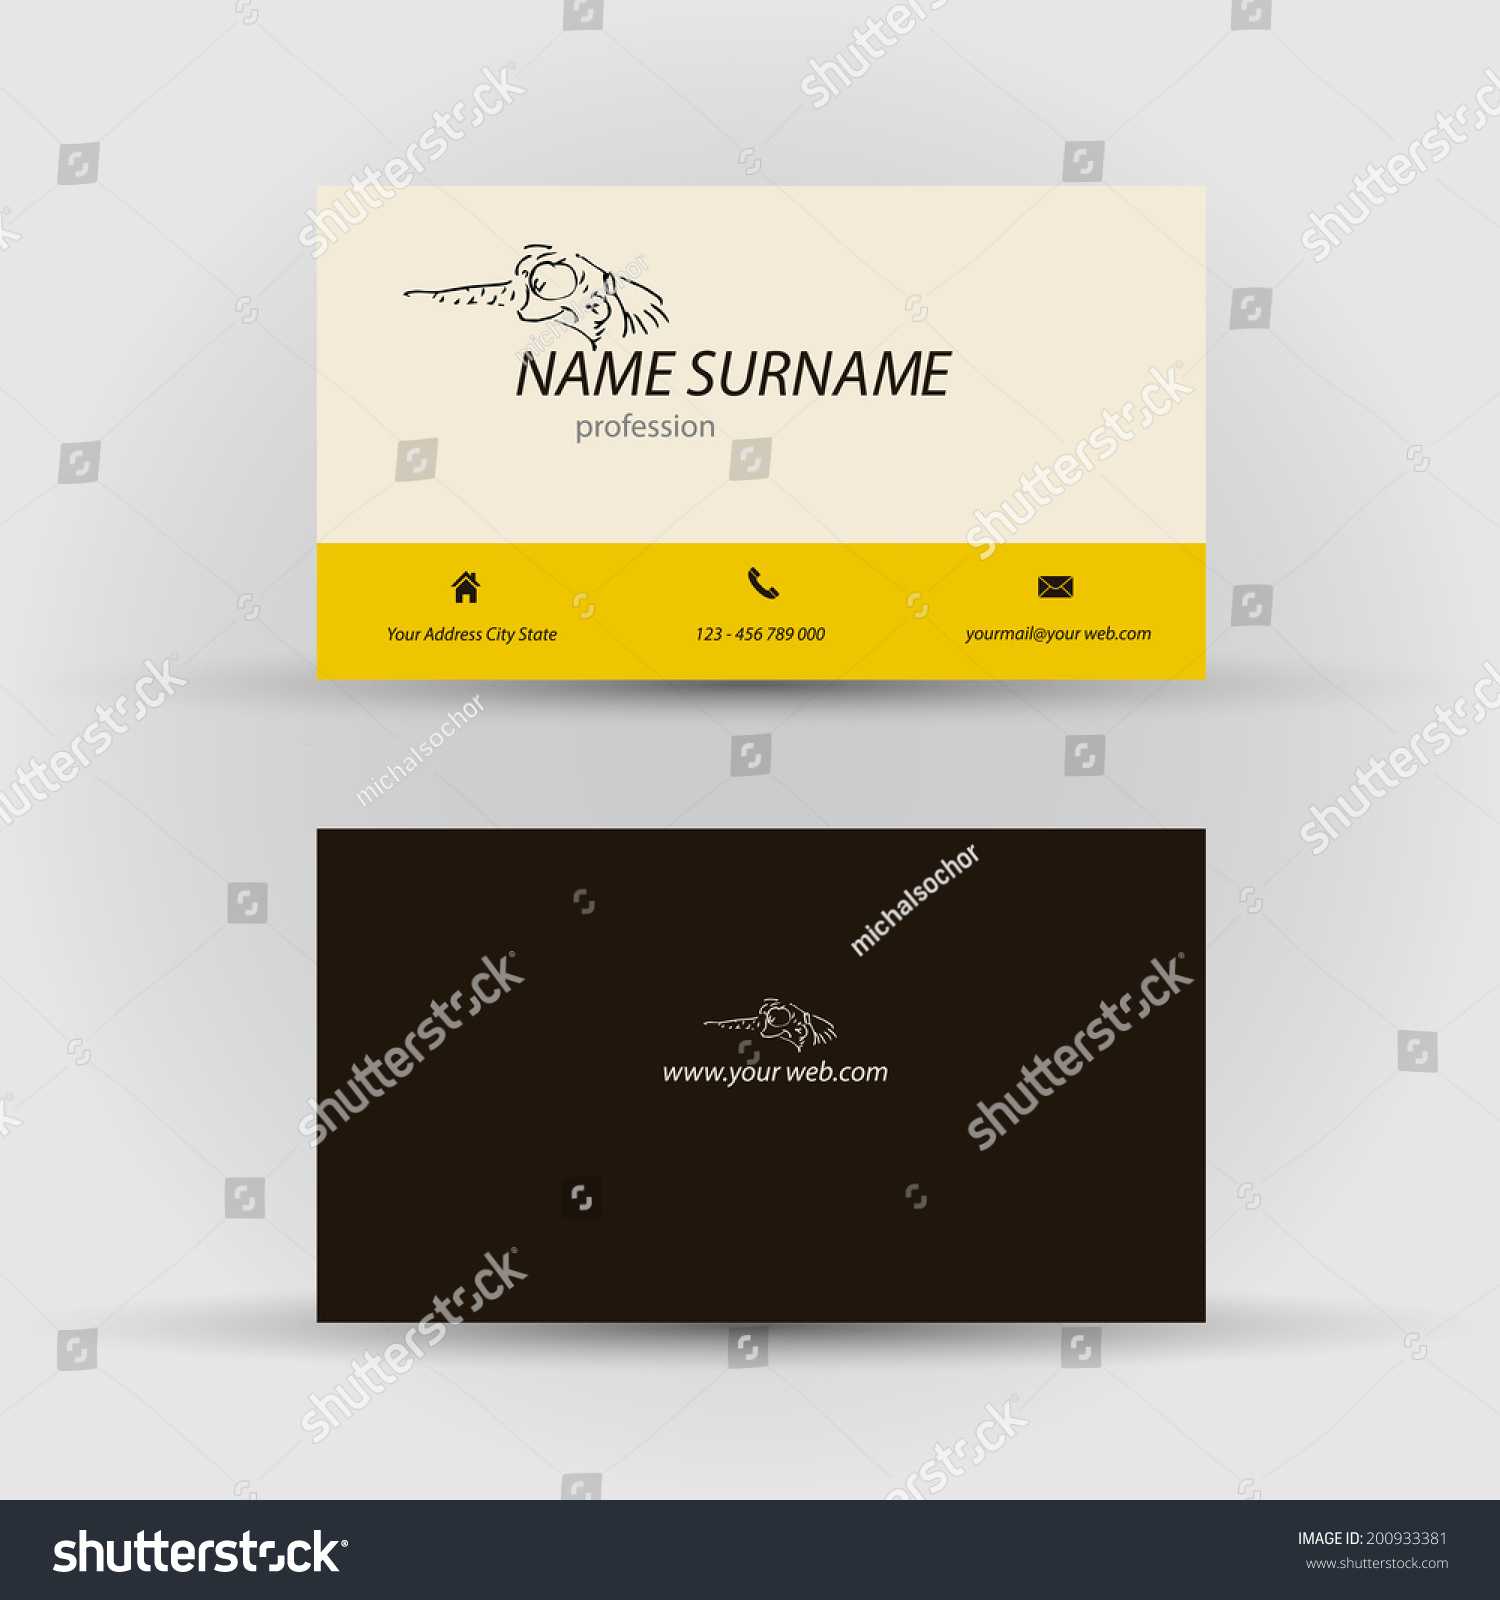 Front And Back Business Card Template Word ] – Business Pertaining To Front And Back Business Card Template Word